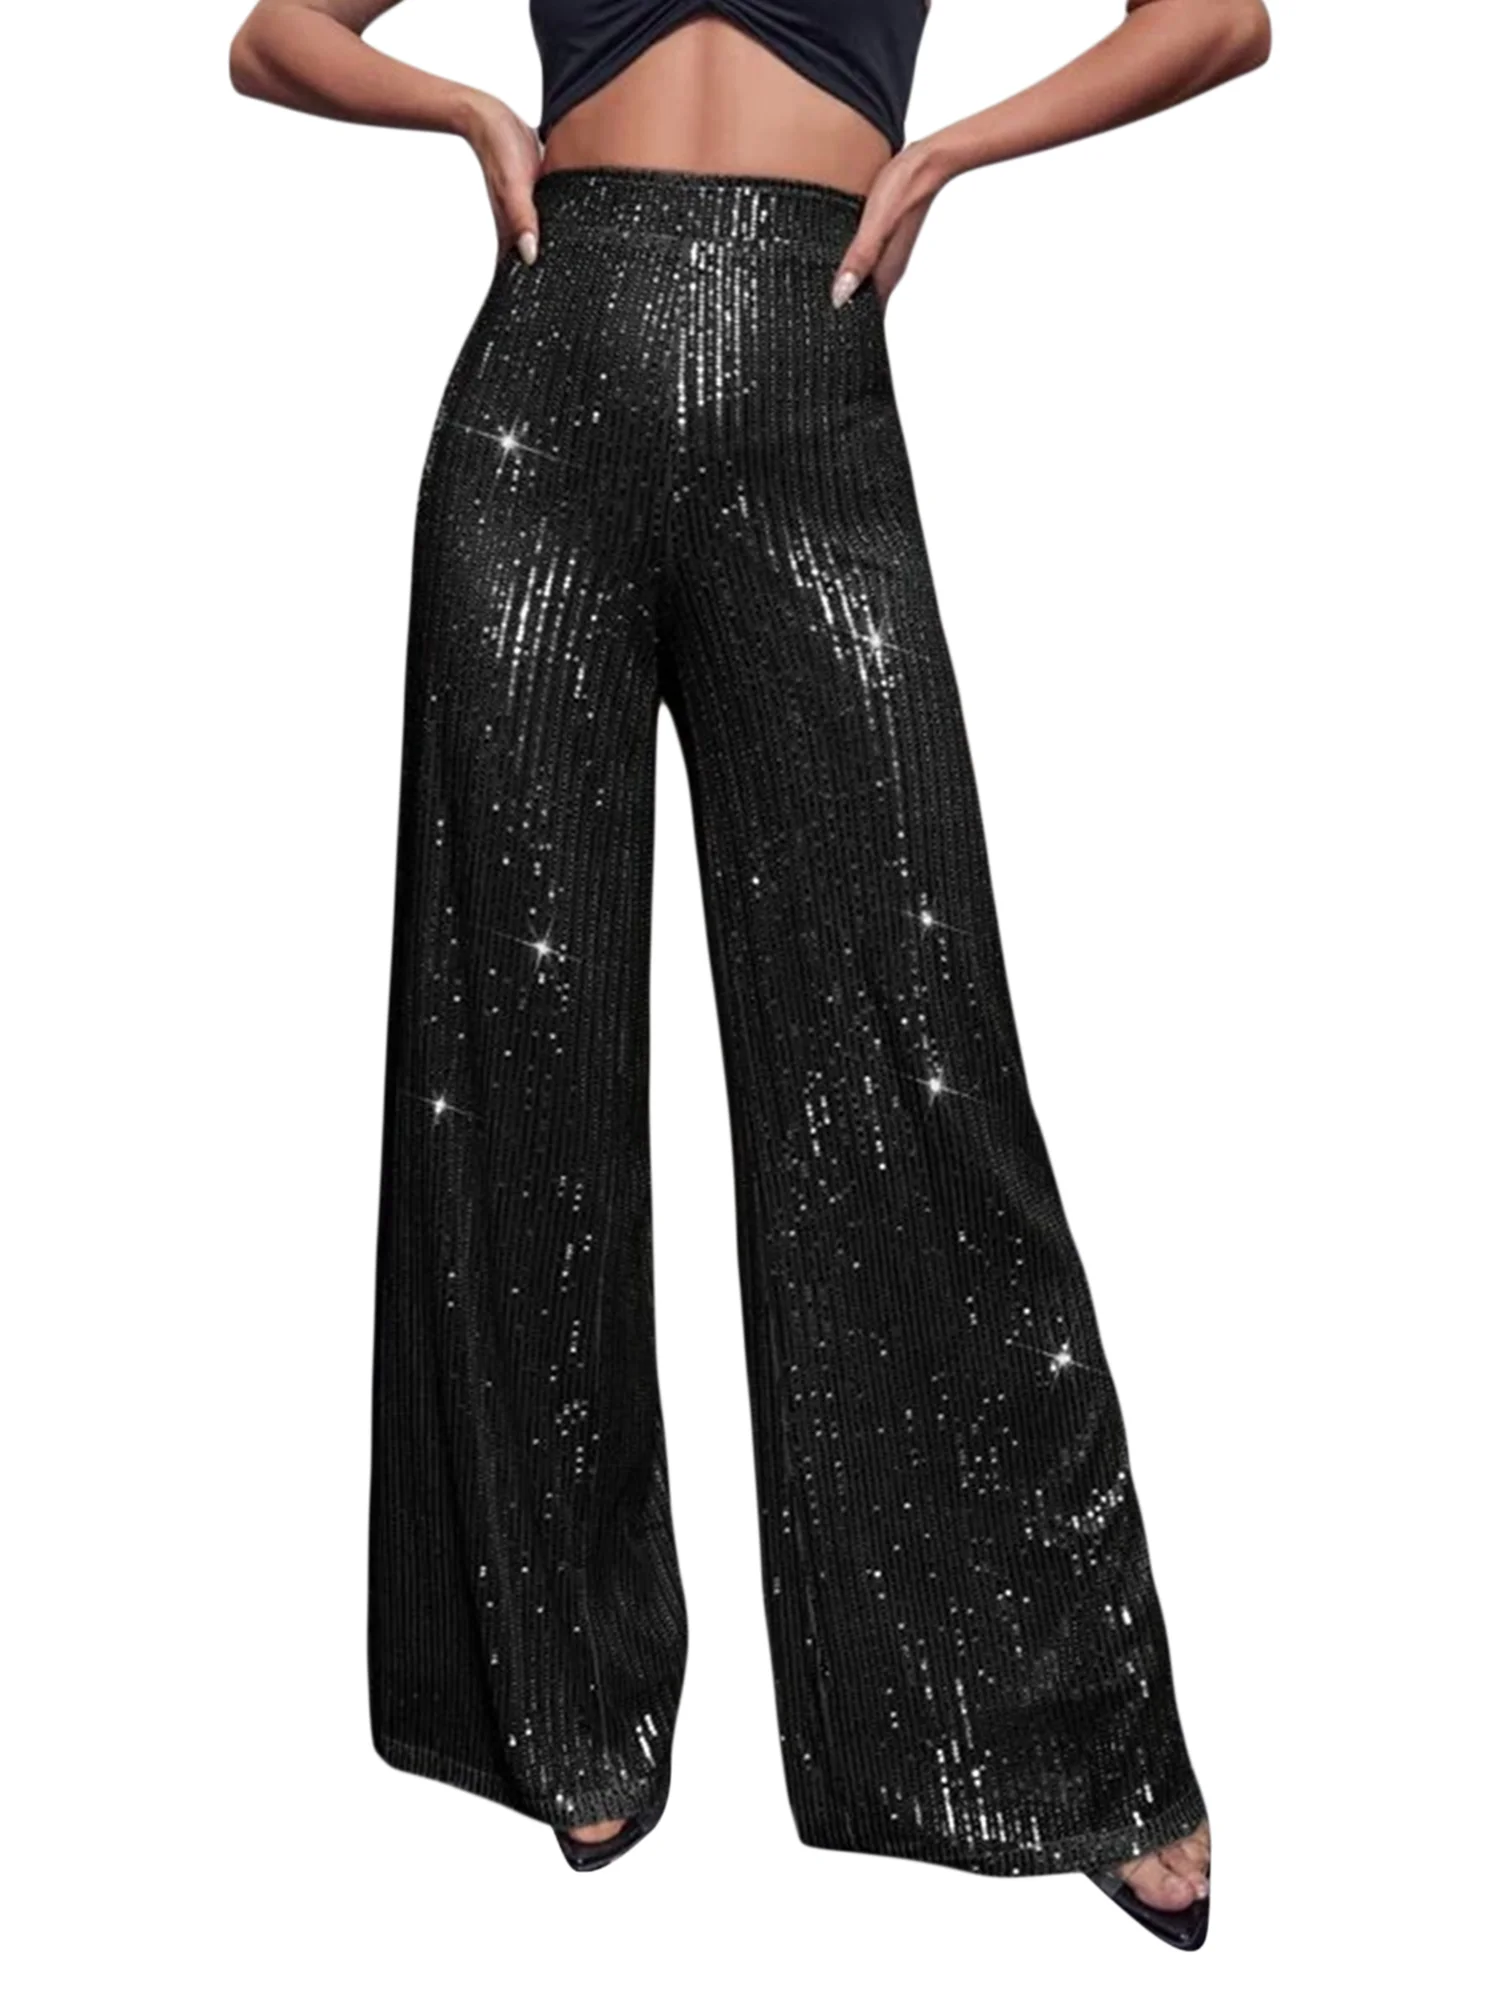 

Women Sparkle Sequin Bell Bottom Pants High Waist Glitter Wide Leg Flare Palazzo Lounge Long Loose Elastic Pants Trousers Night